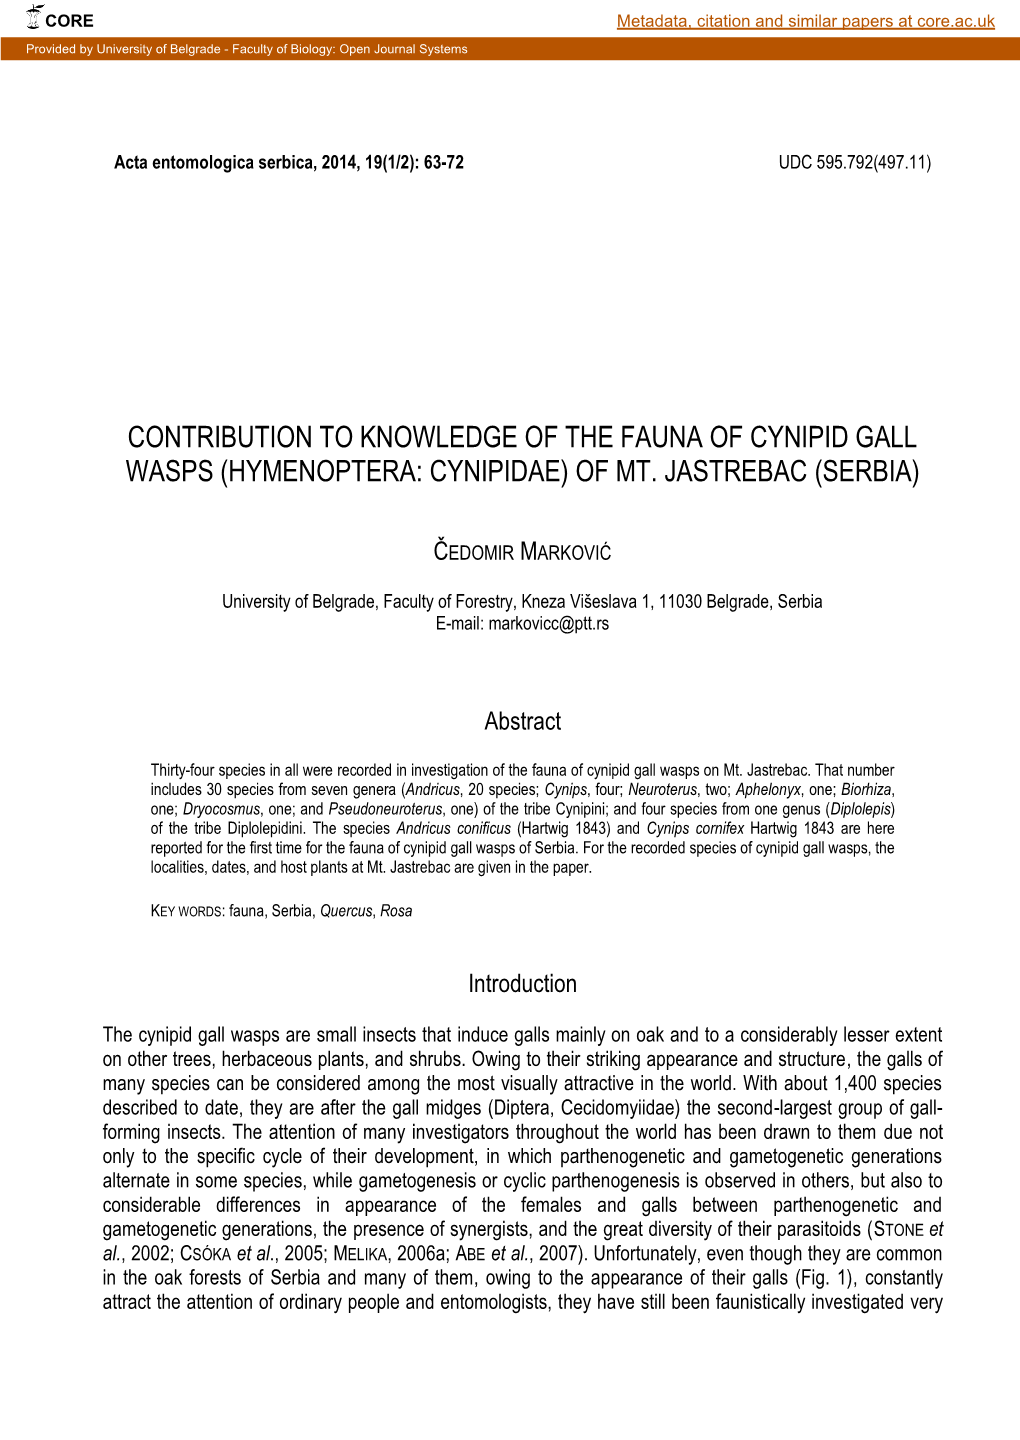 Contribution to Knowledge of the Fauna of Cynipid Gall Wasps (Hymenoptera: Cynipidae) of Mt